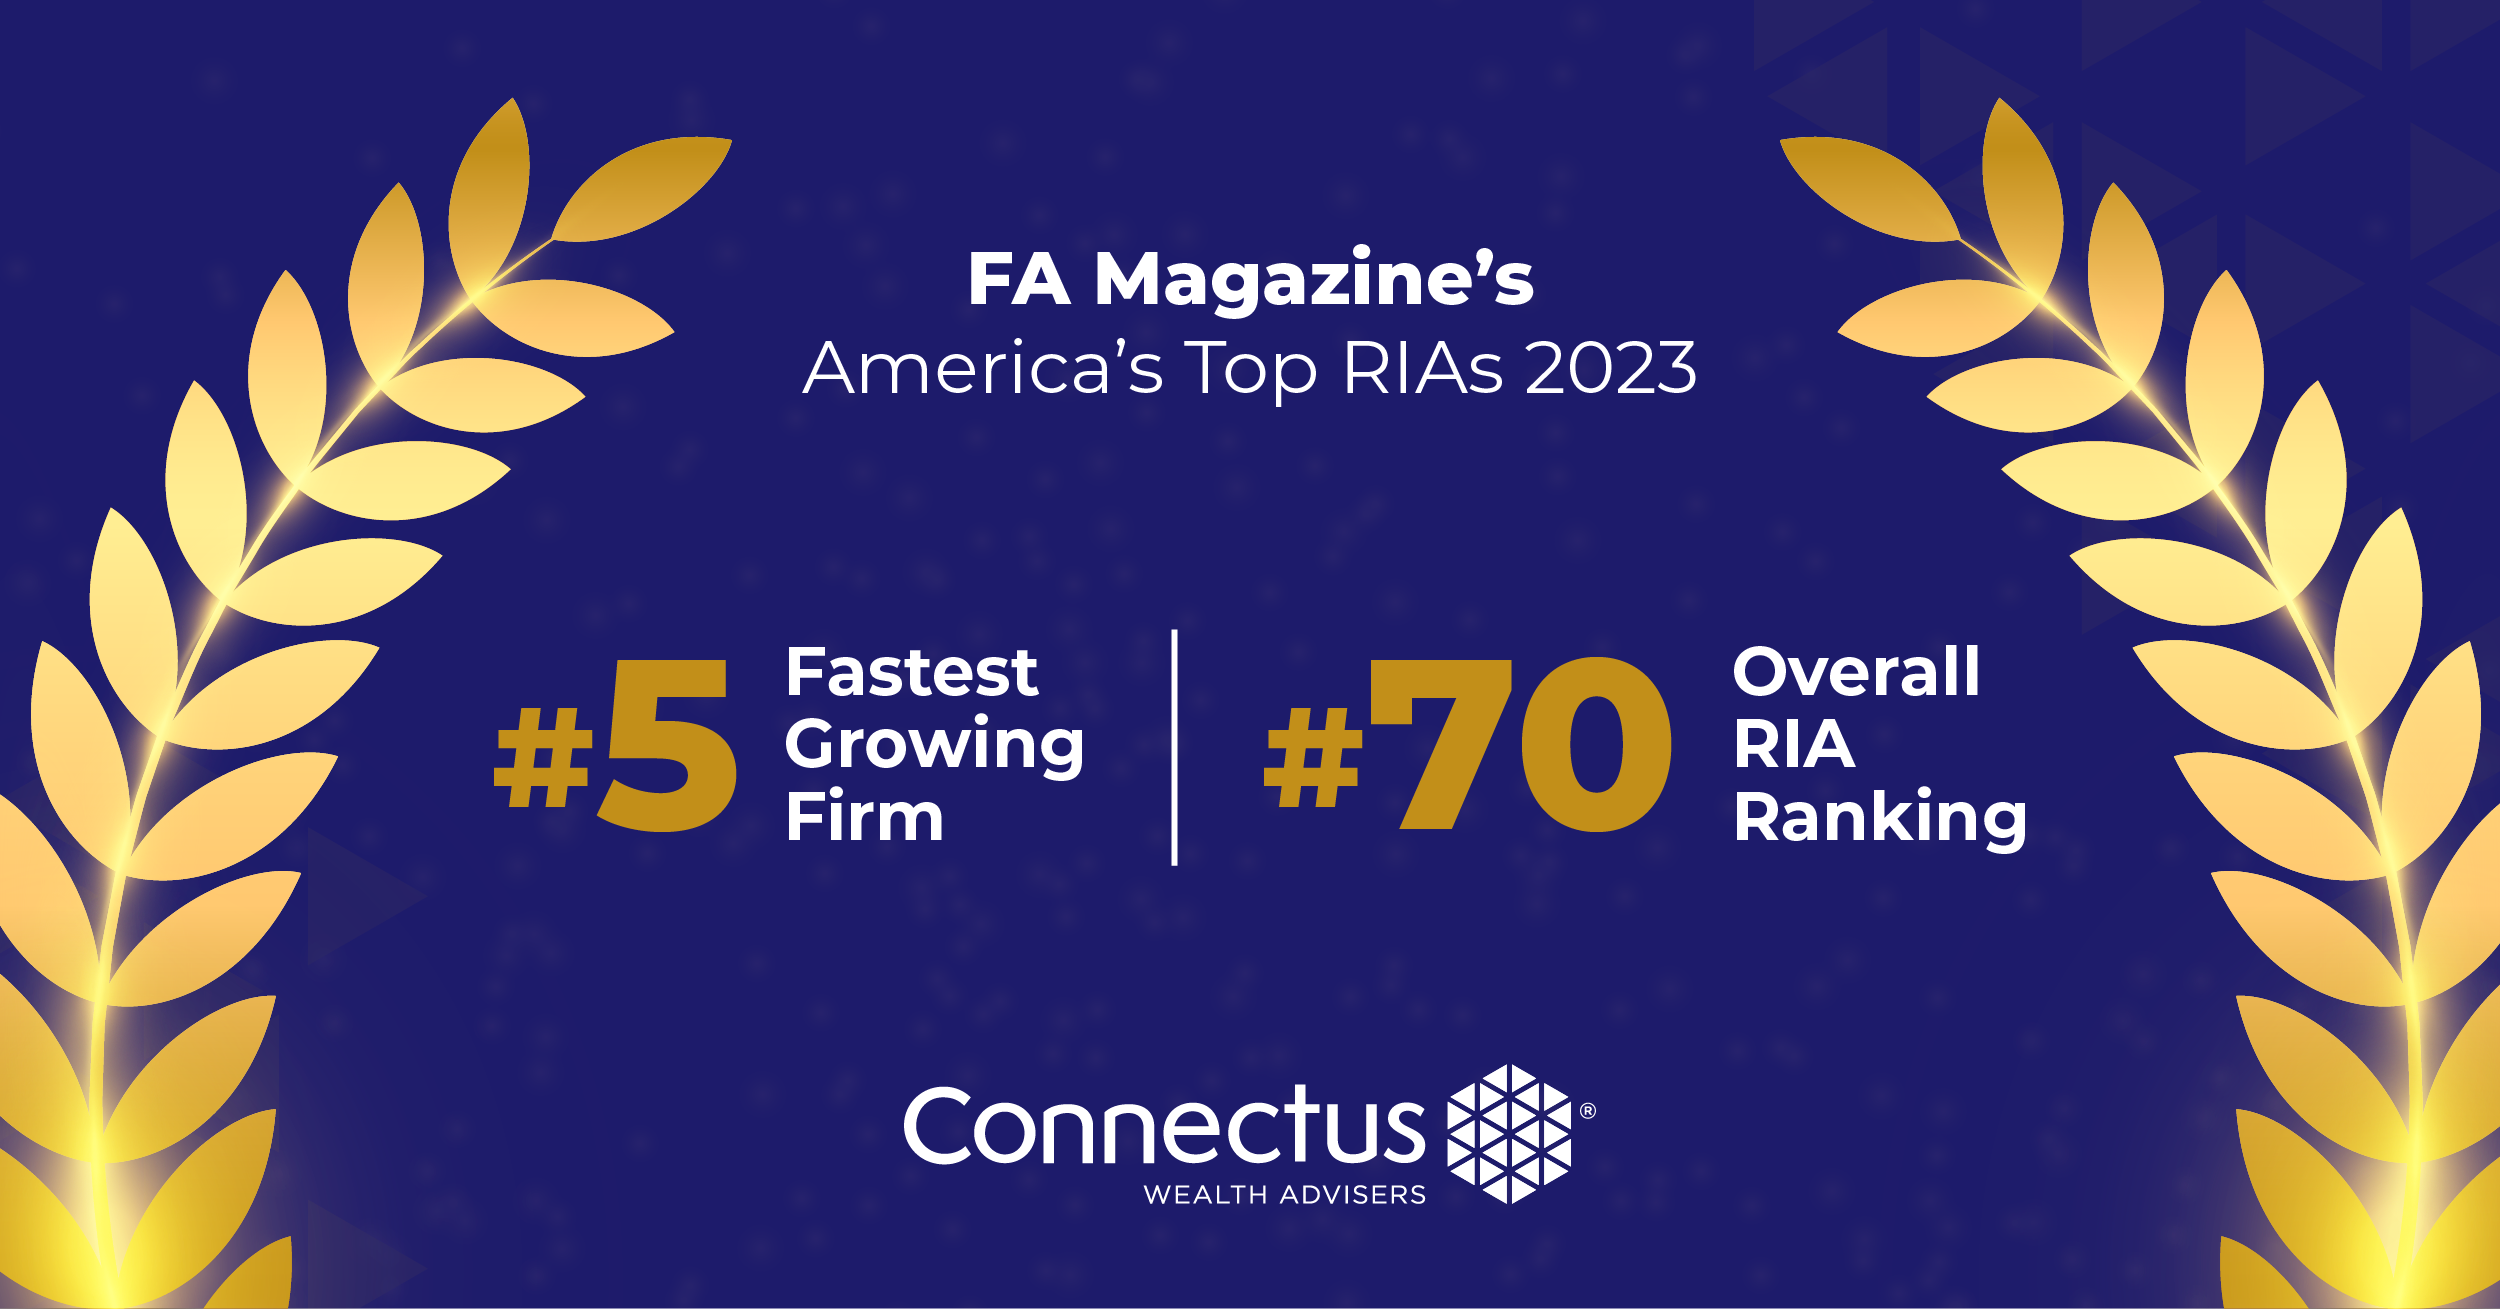 Connectus Wealth Advisers Recognized as one of America’s Top RIAs